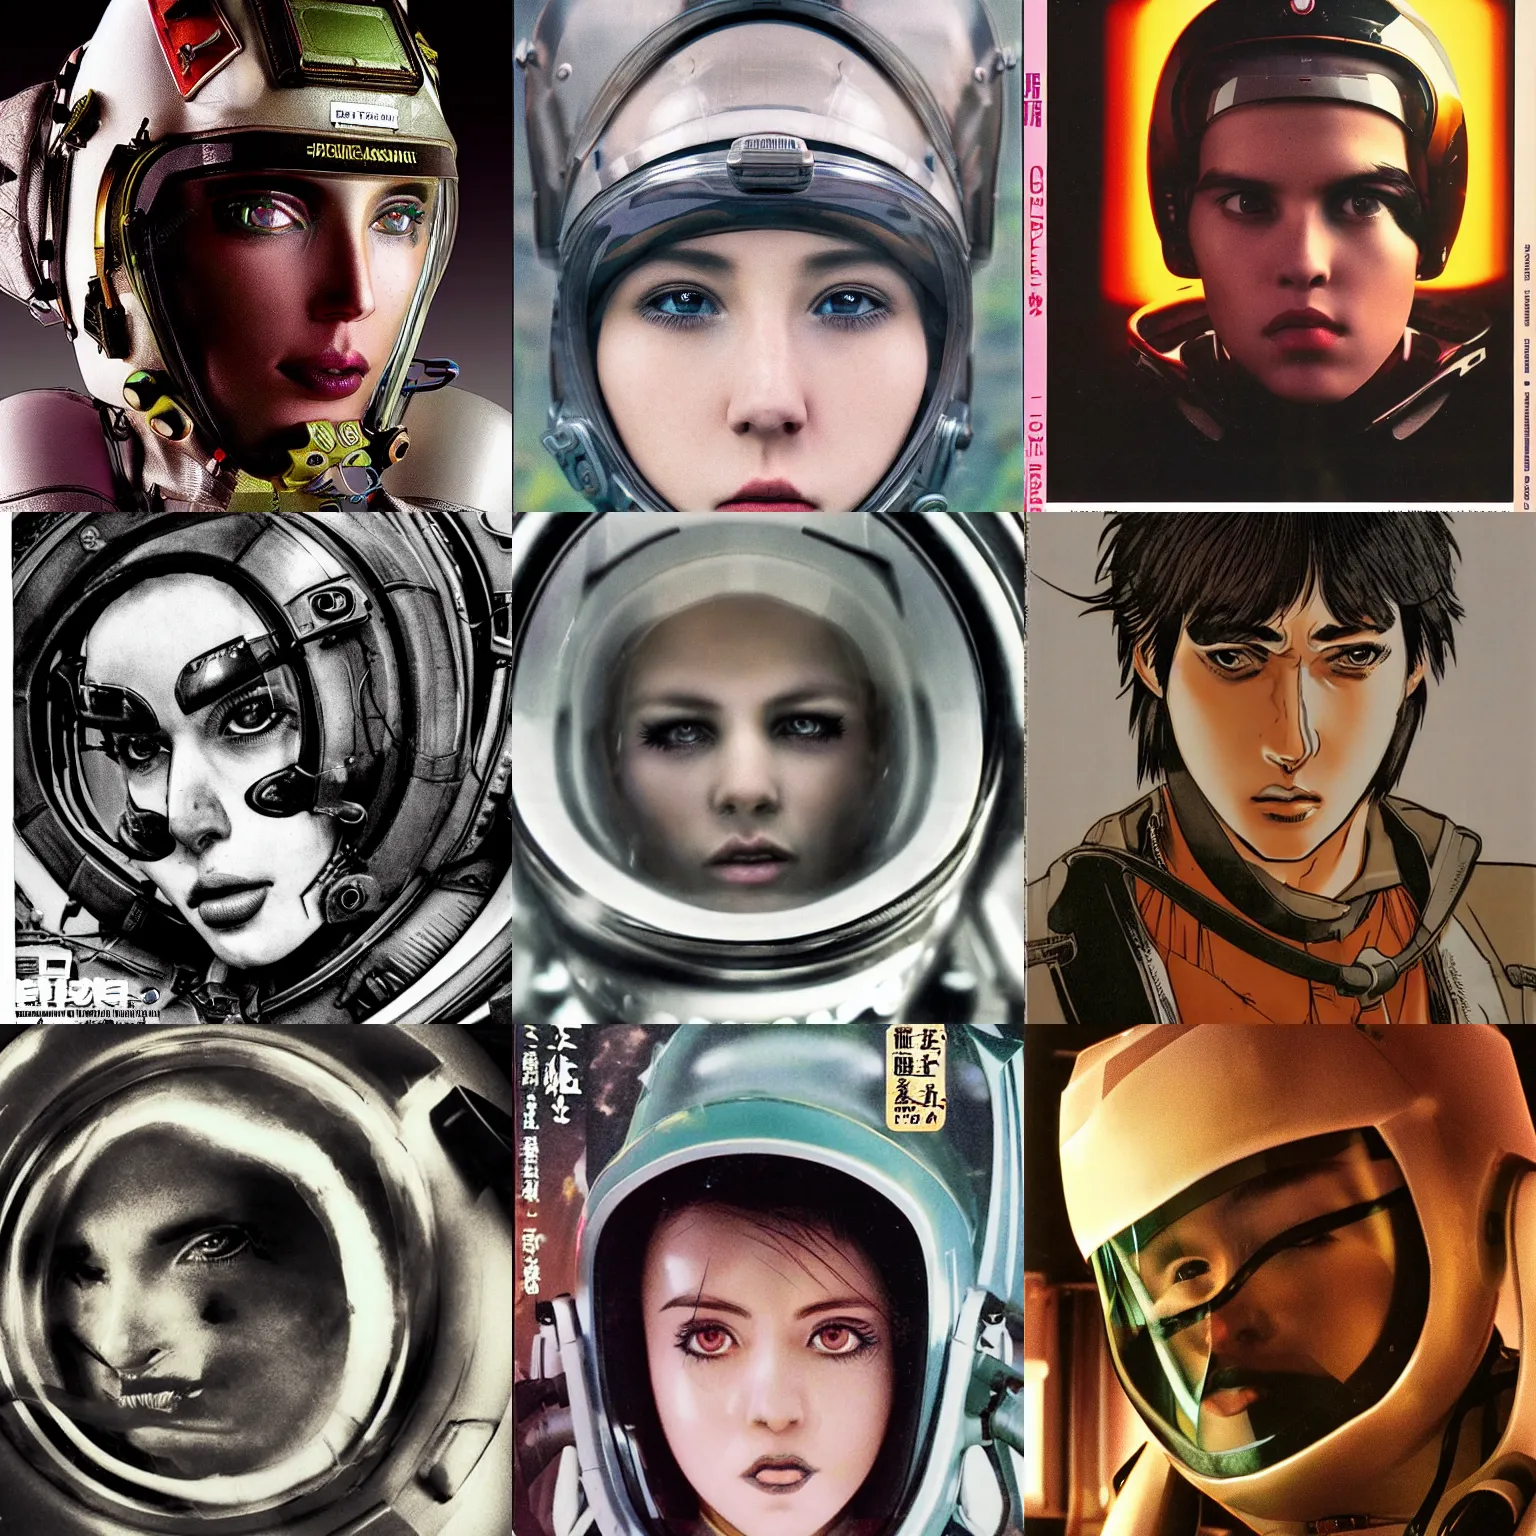 Prompt: beautiful extreme closeup portrait photo in style of 1990s frontiers in retrofuturism deep diving helmet seinen manga magazine sid mead edition, highly detailed, focus on pursed lips, eye contact, soft lighting